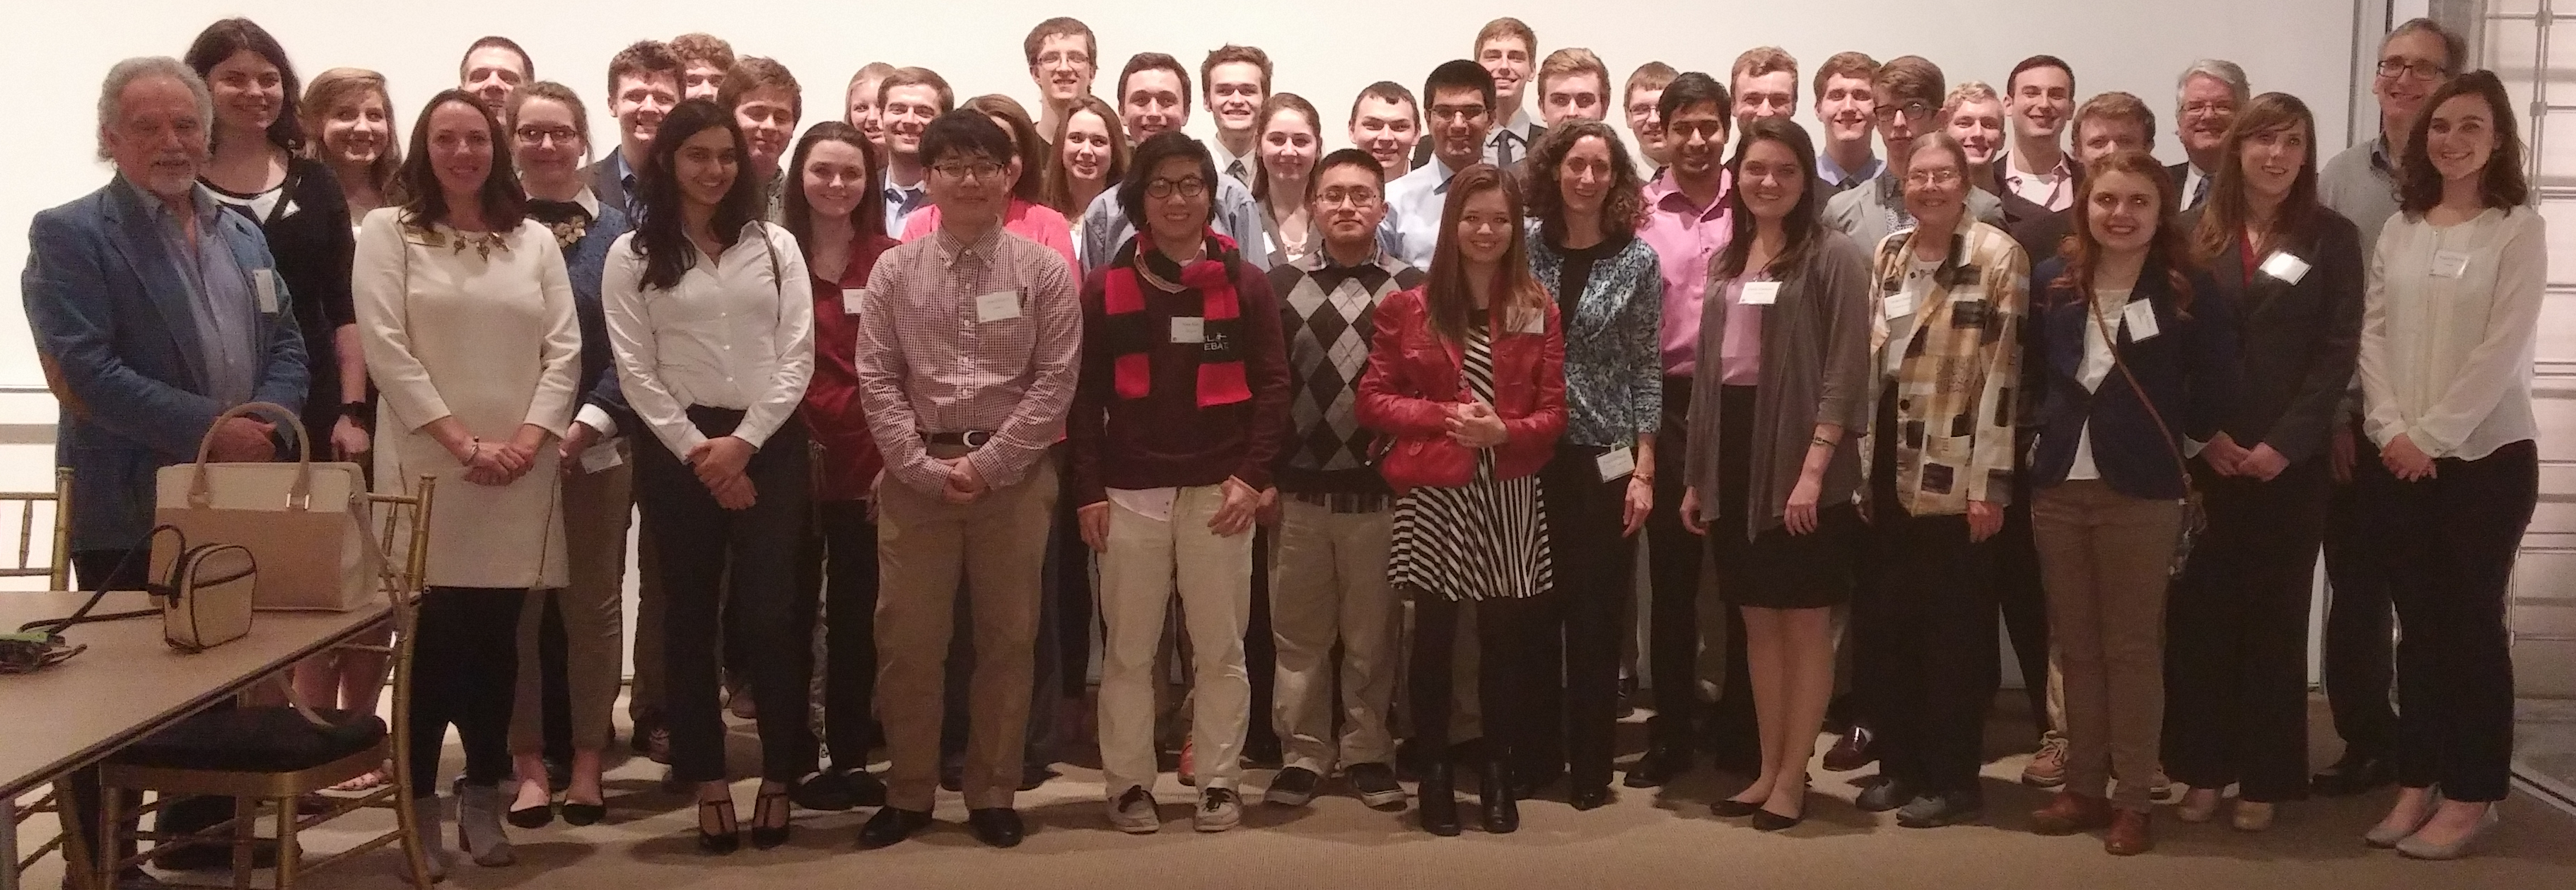 Group of students and alumni at an event in Chicago.